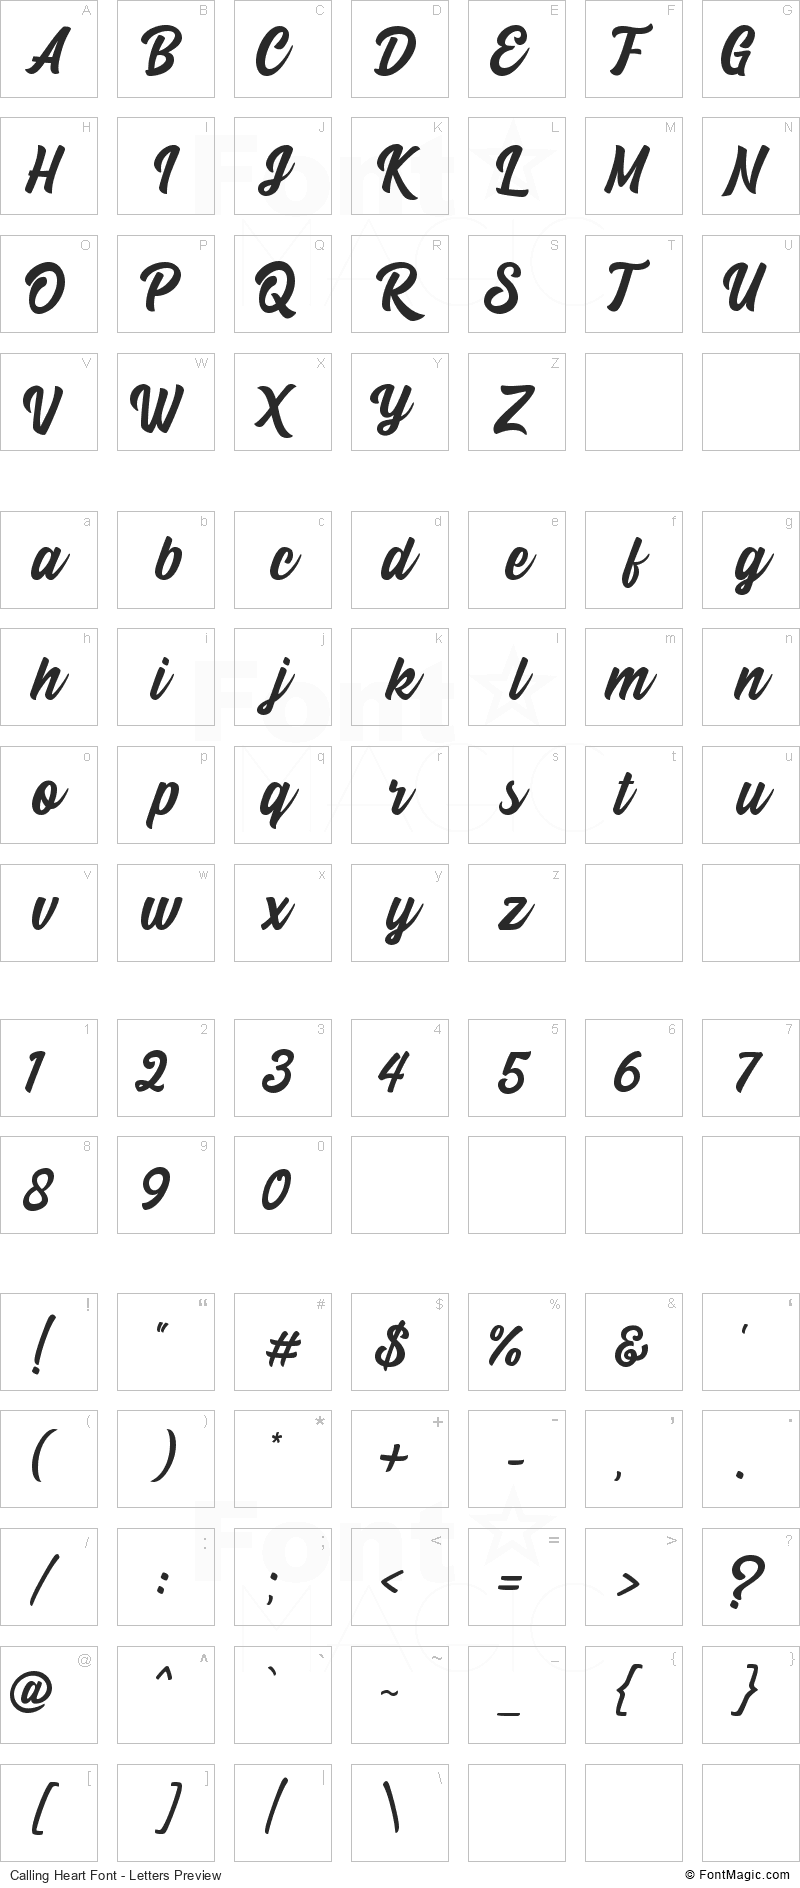 Calling Heart Font - All Latters Preview Chart